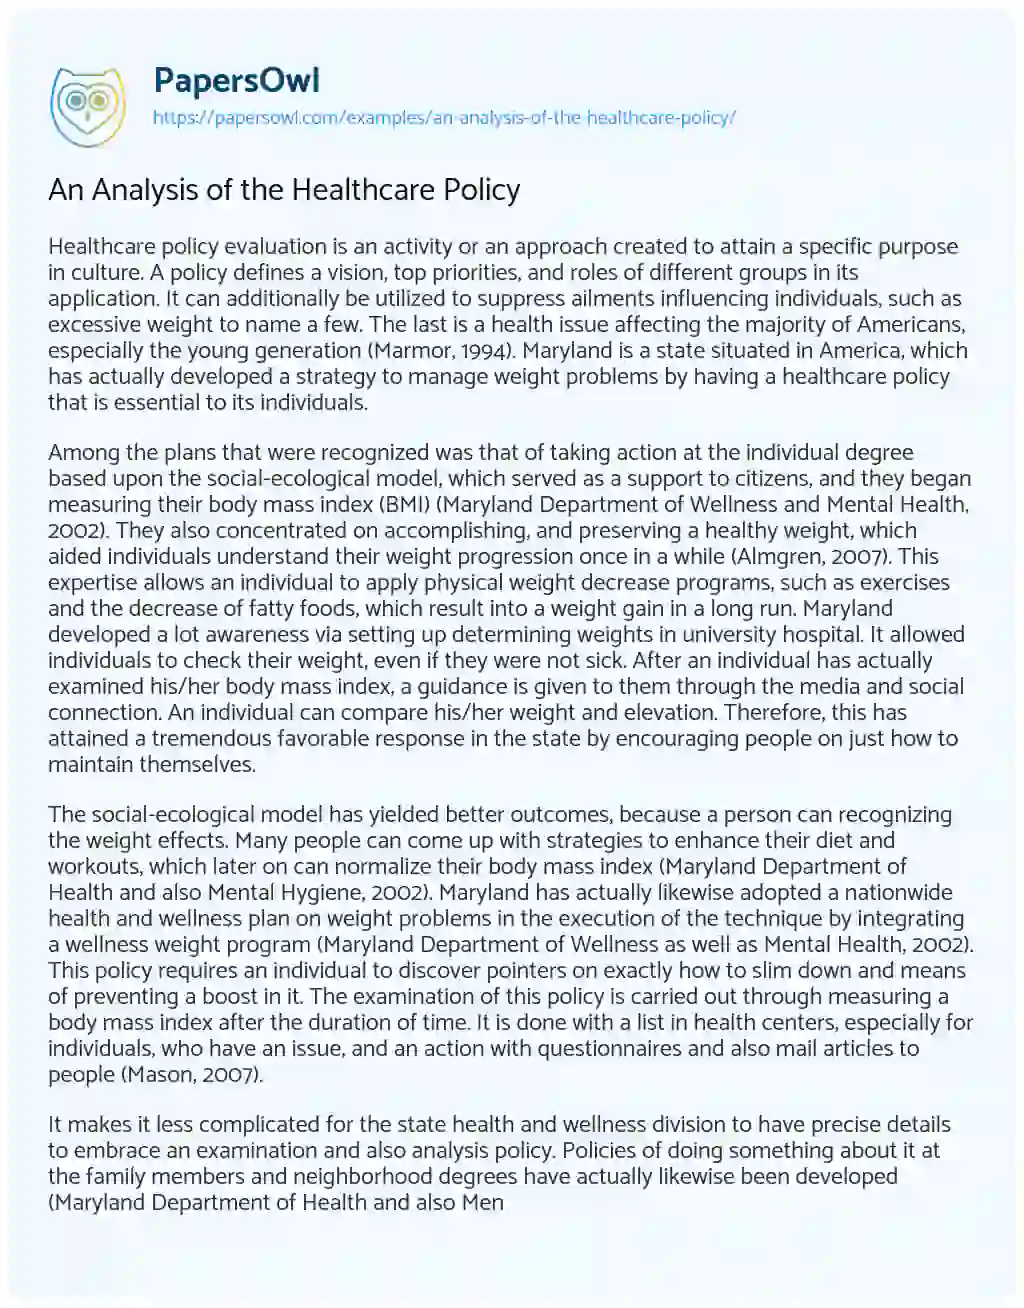 An Analysis of the Healthcare Policy essay